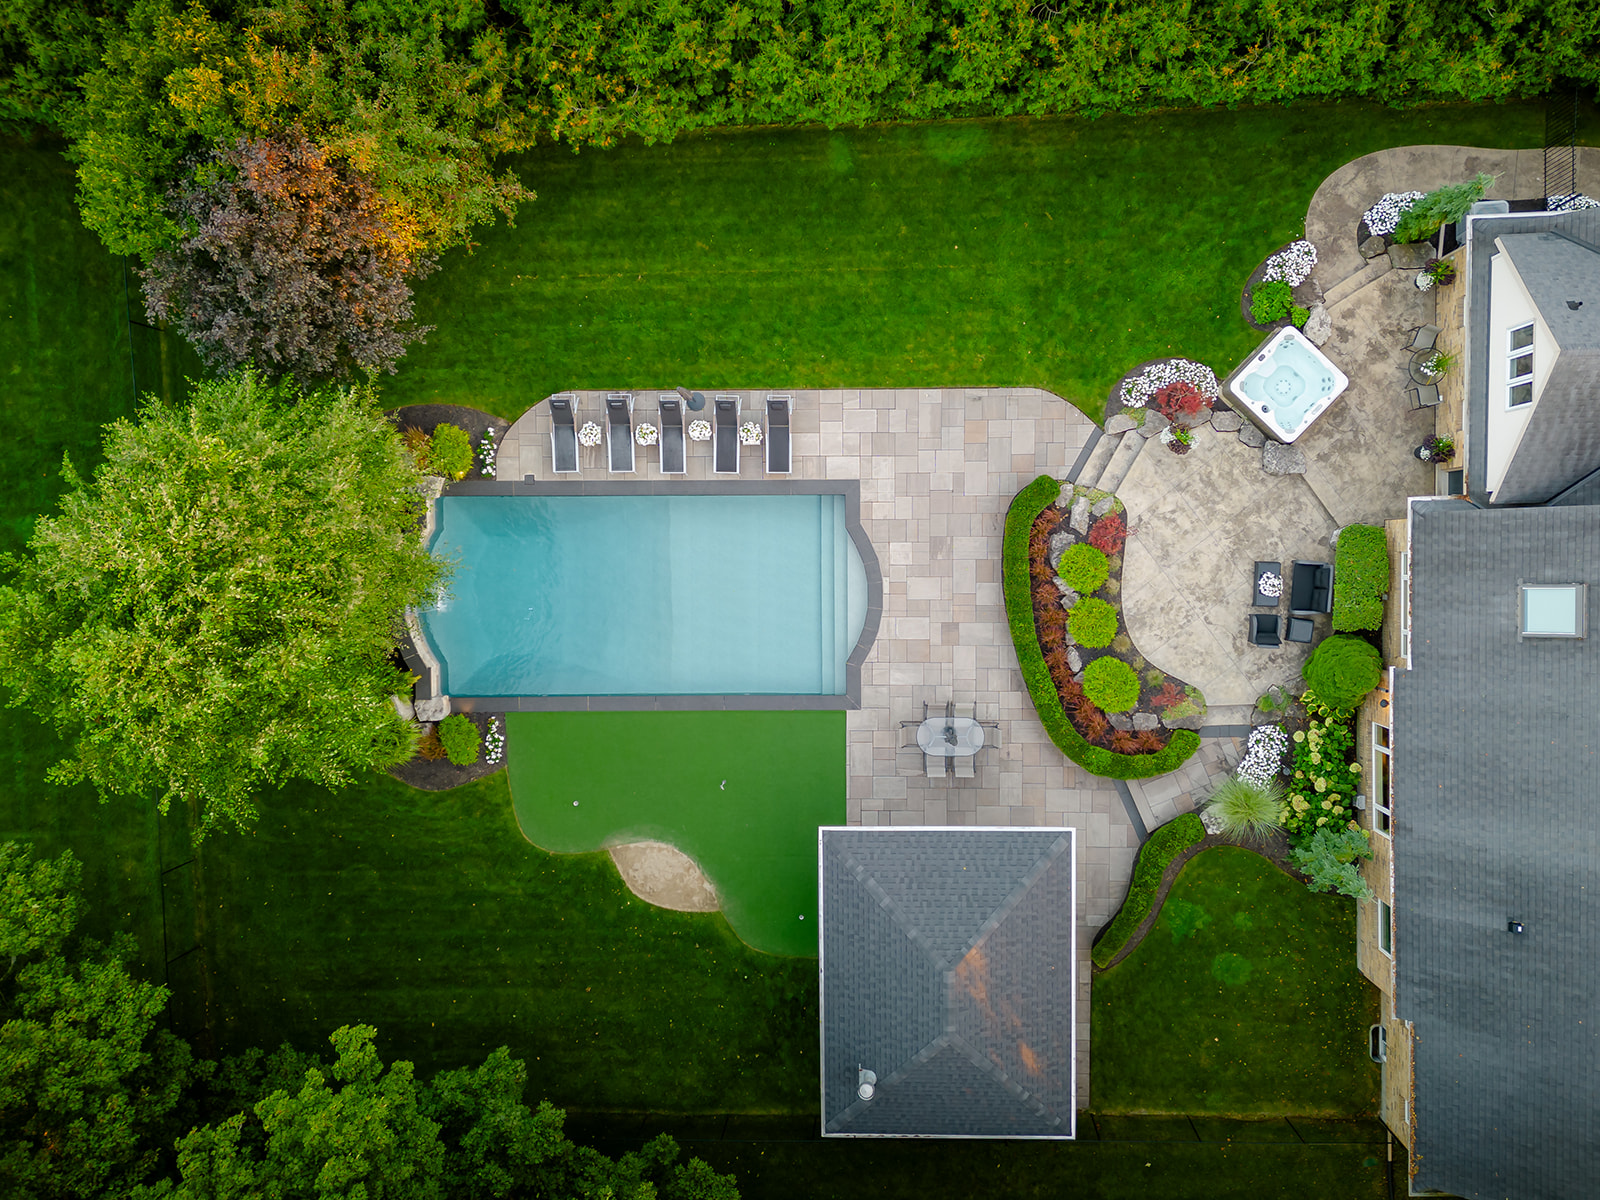 A top-down view of the backyard with an ingorund pool.